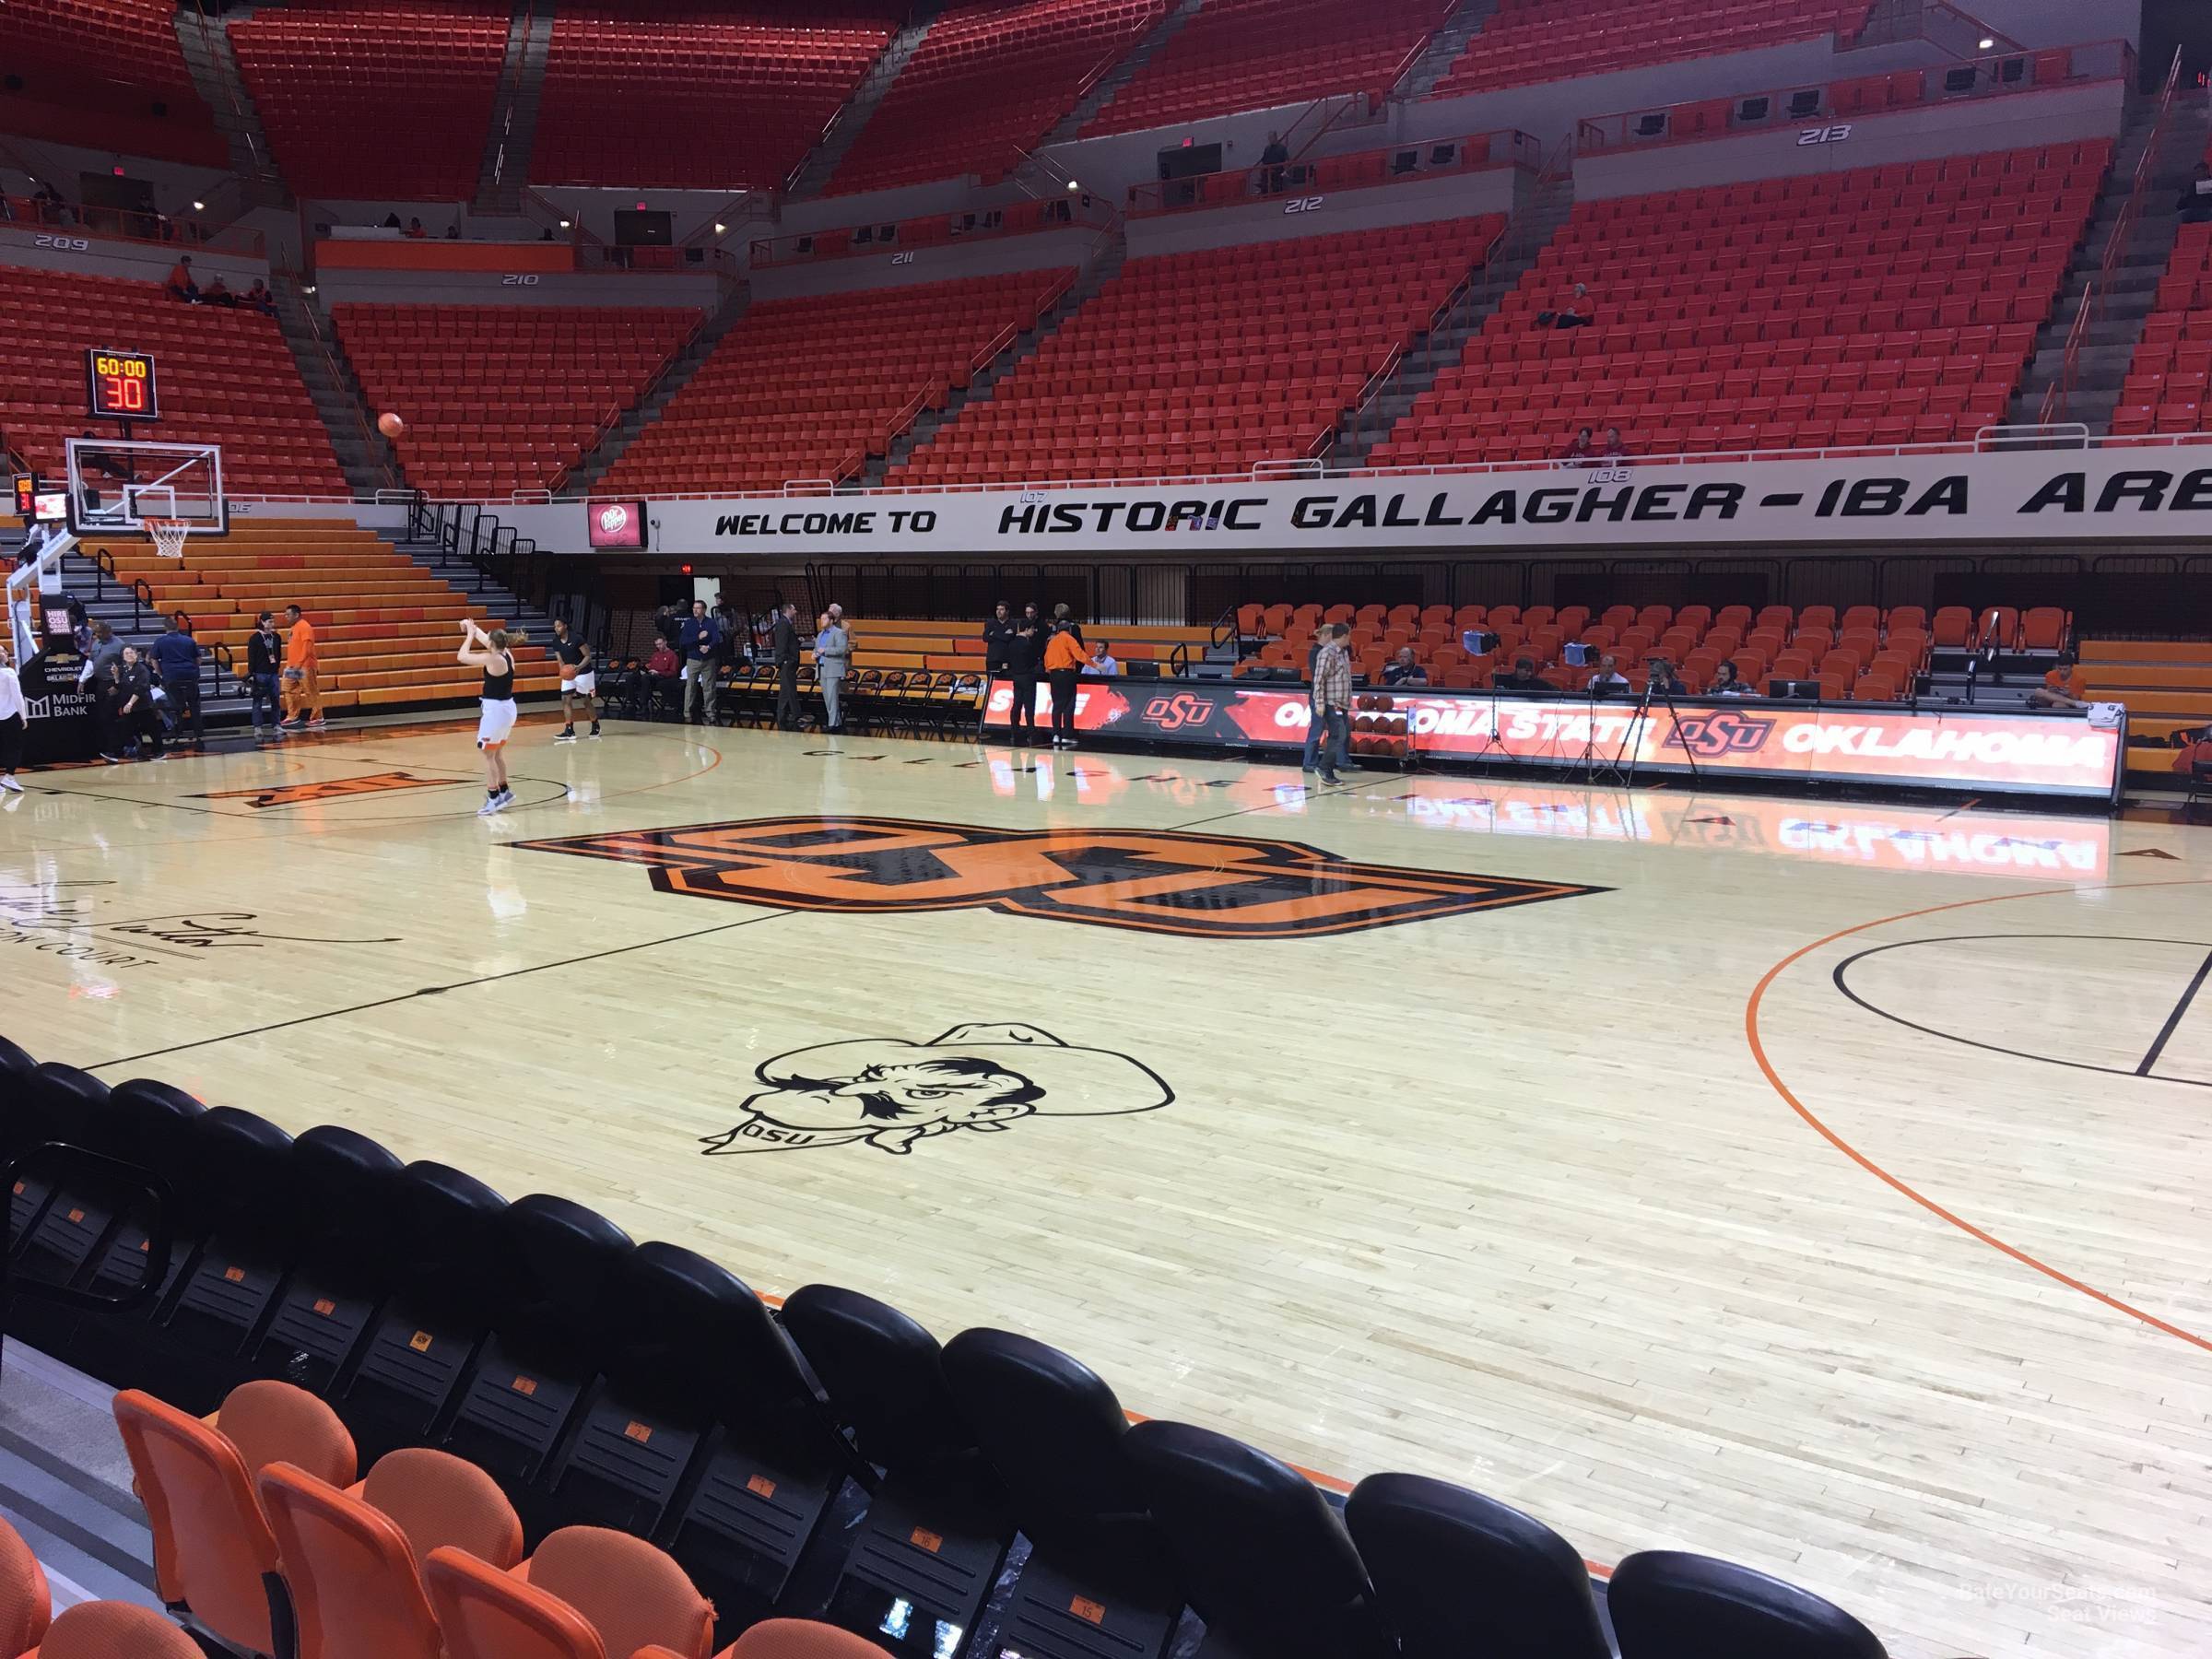 section 101, row 3 seat view  - gallagher-iba arena